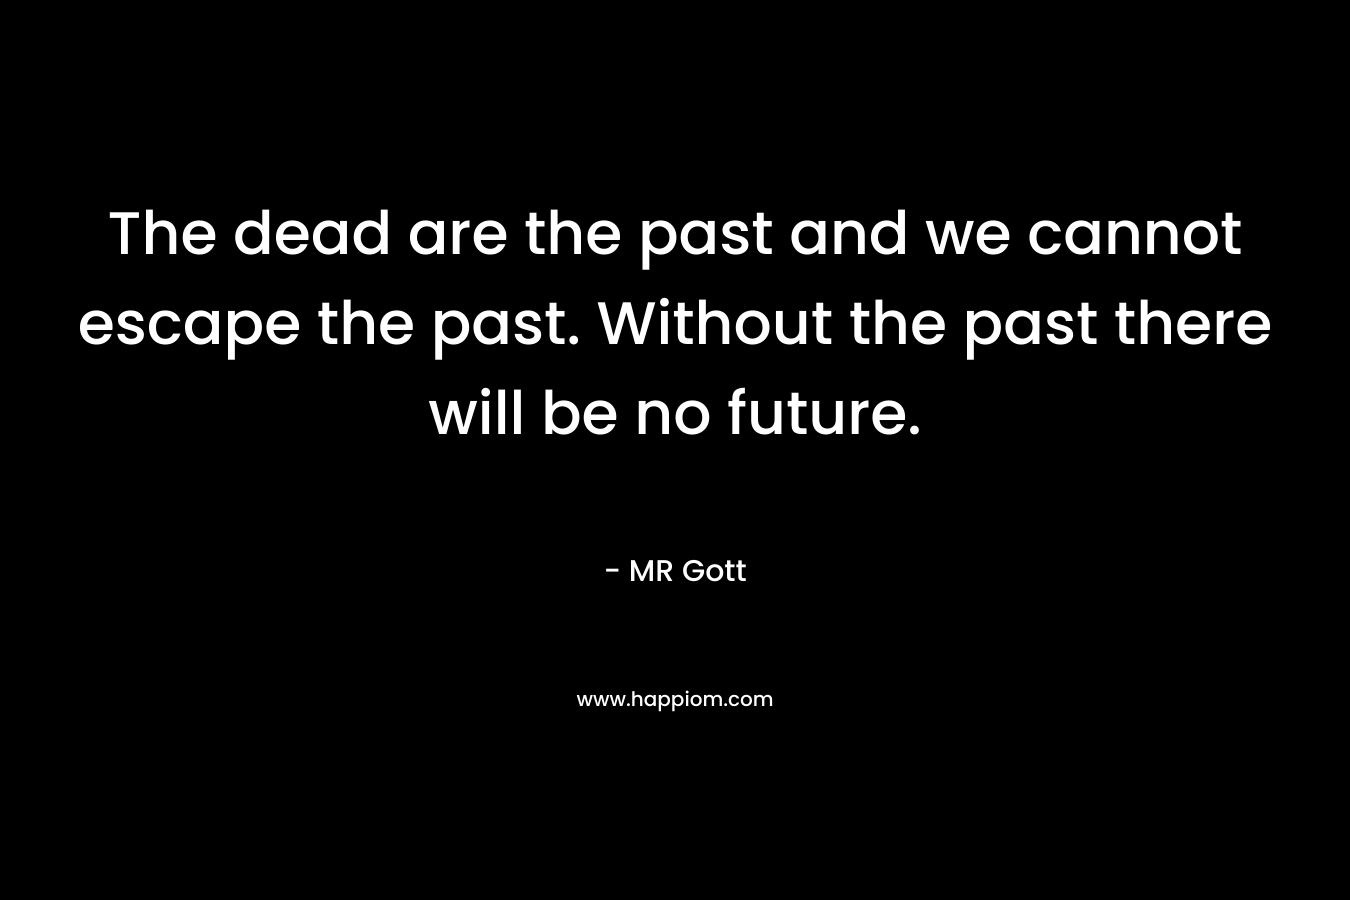 The dead are the past and we cannot escape the past. Without the past there will be no future.